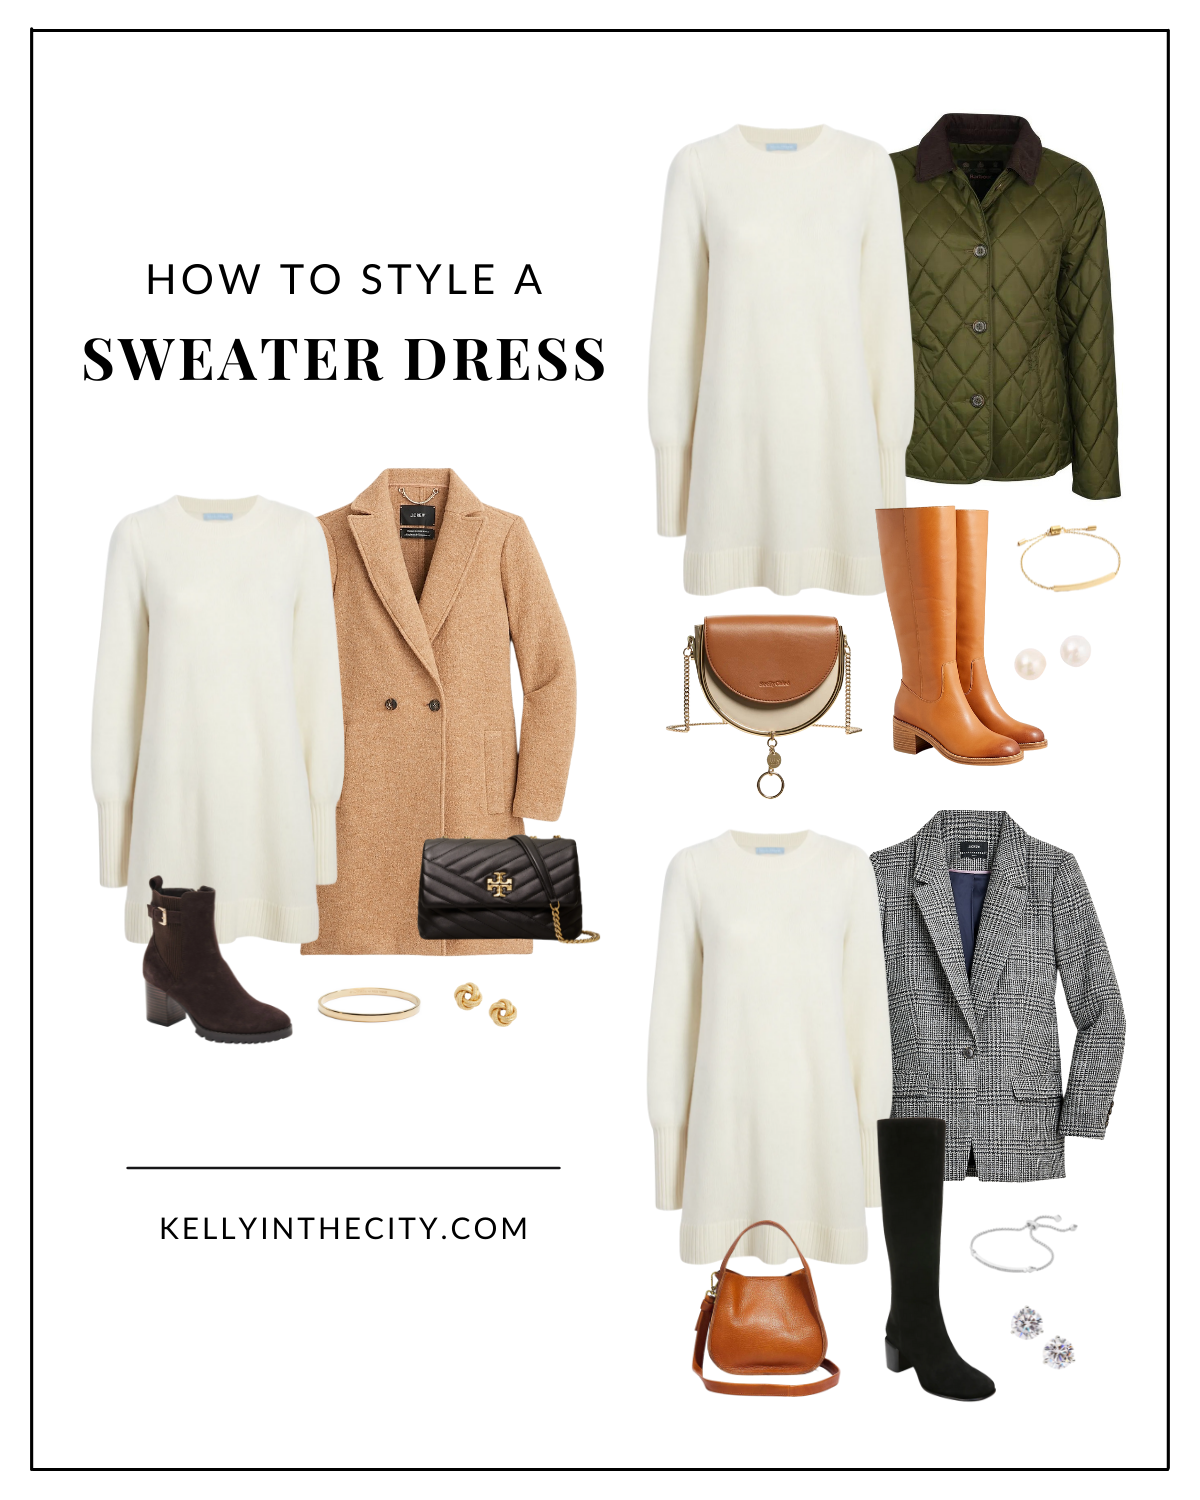 How to Style a Sweater Dress 3 Ways